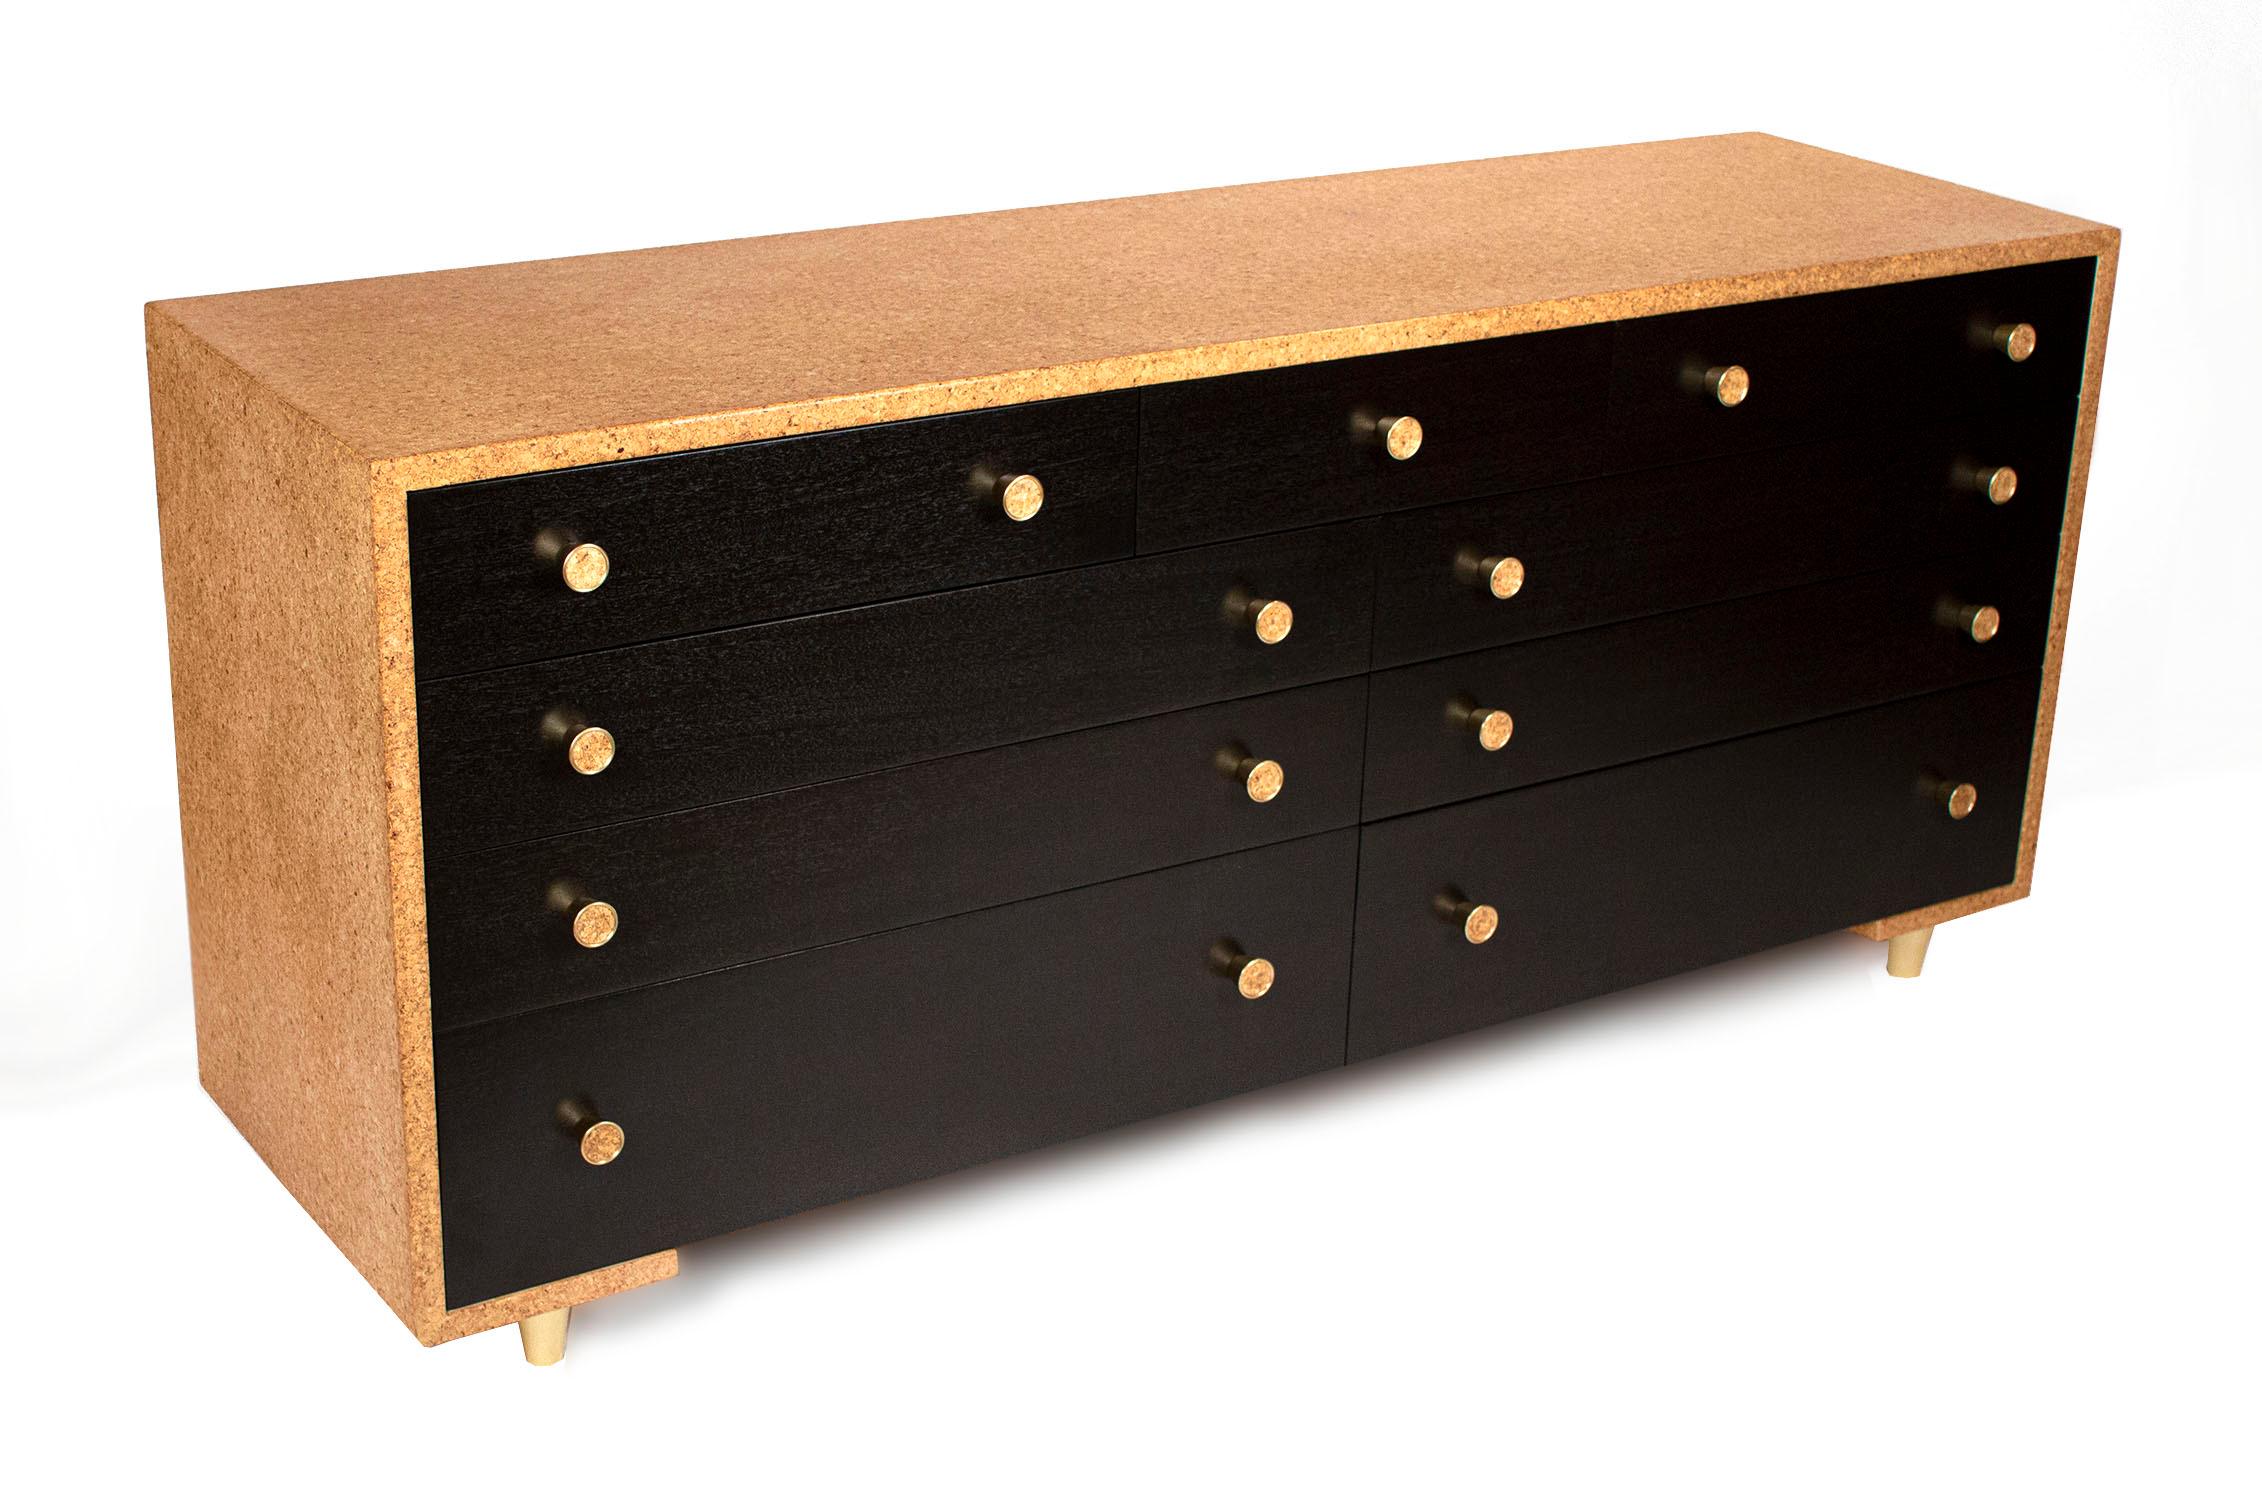 Rare & amazing waterfall nine drawer dresser designed by Paul Frankl. Dresser has a beautiful cork top & sides, black lacquer drawer fronts with inlaid cork and brass pulls and sits on three-inch tall tapered legs.